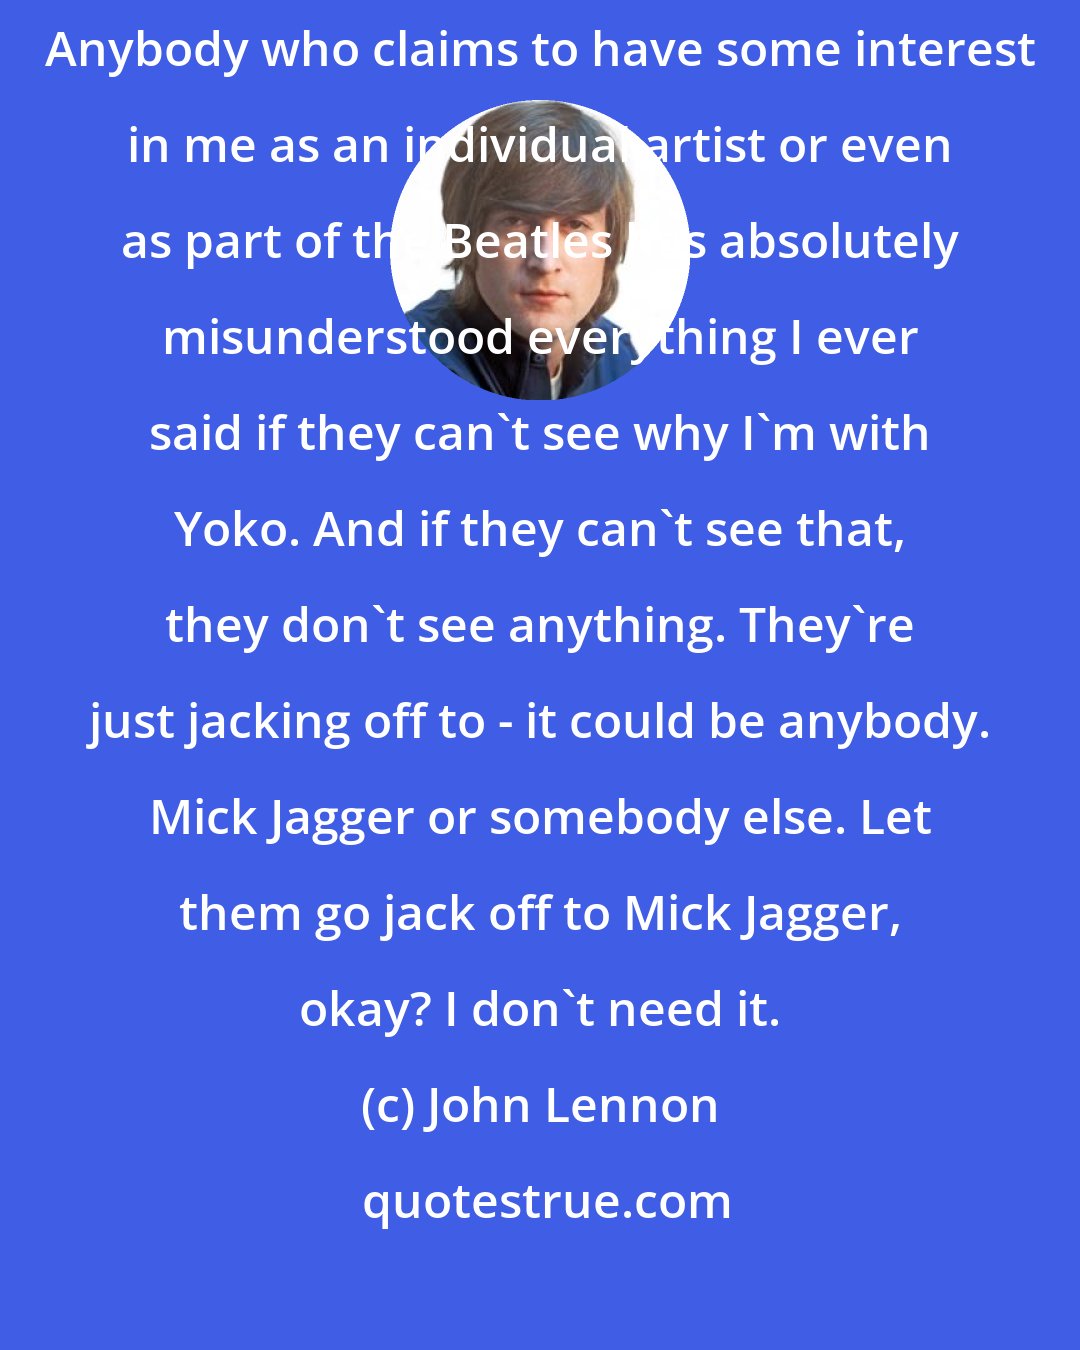 John Lennon: They want to hold onto something they never had in the first place. Anybody who claims to have some interest in me as an individual artist or even as part of the Beatles has absolutely misunderstood everything I ever said if they can't see why I'm with Yoko. And if they can't see that, they don't see anything. They're just jacking off to - it could be anybody. Mick Jagger or somebody else. Let them go jack off to Mick Jagger, okay? I don't need it.